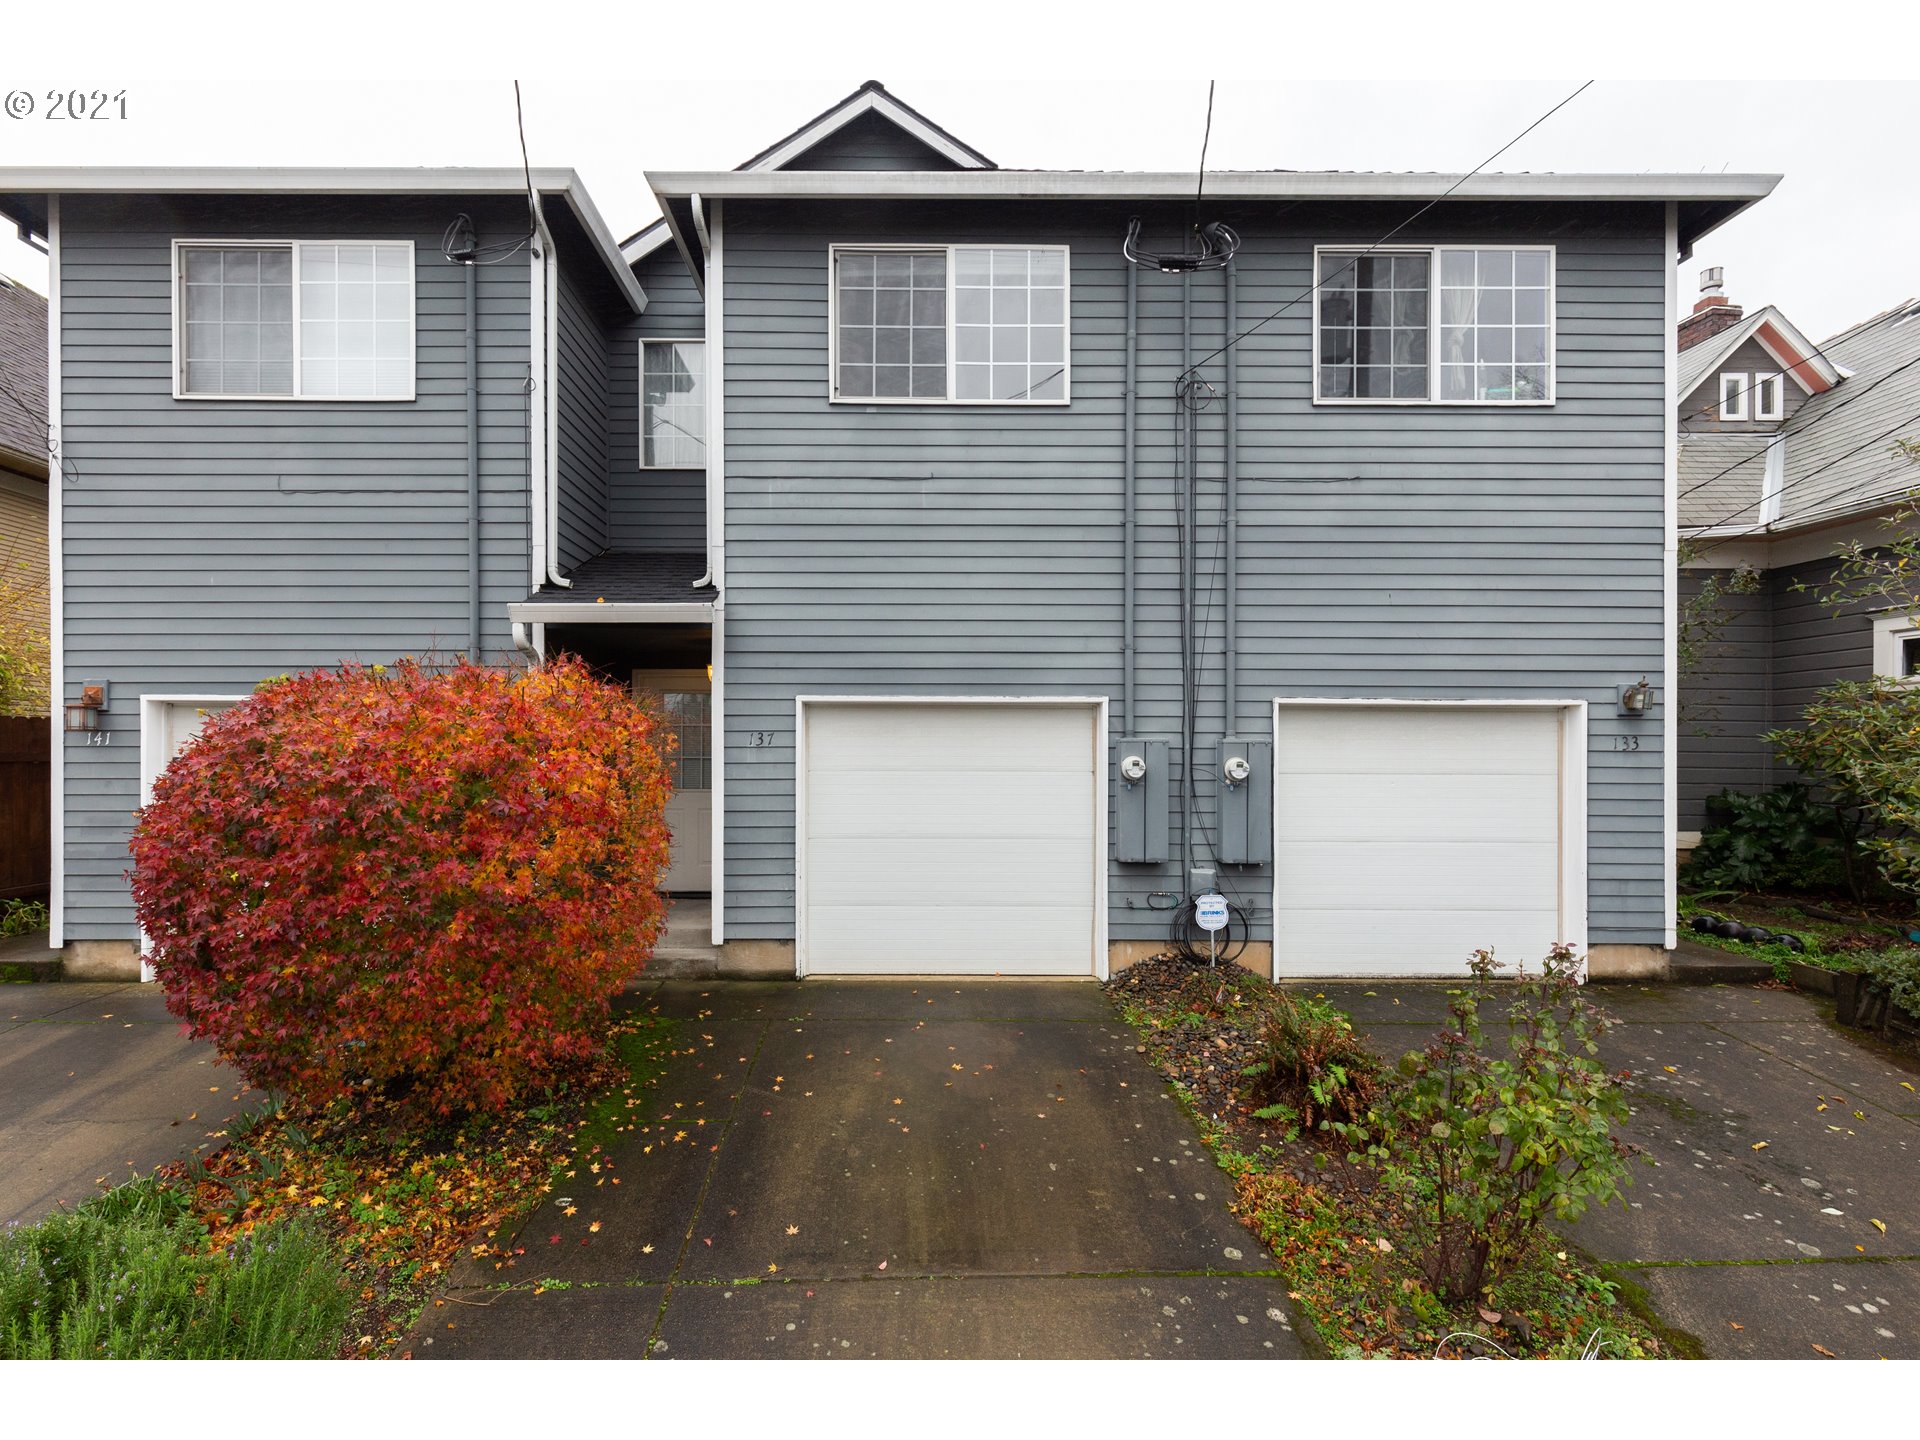 137 SE 80TH AVE (1 of 20)